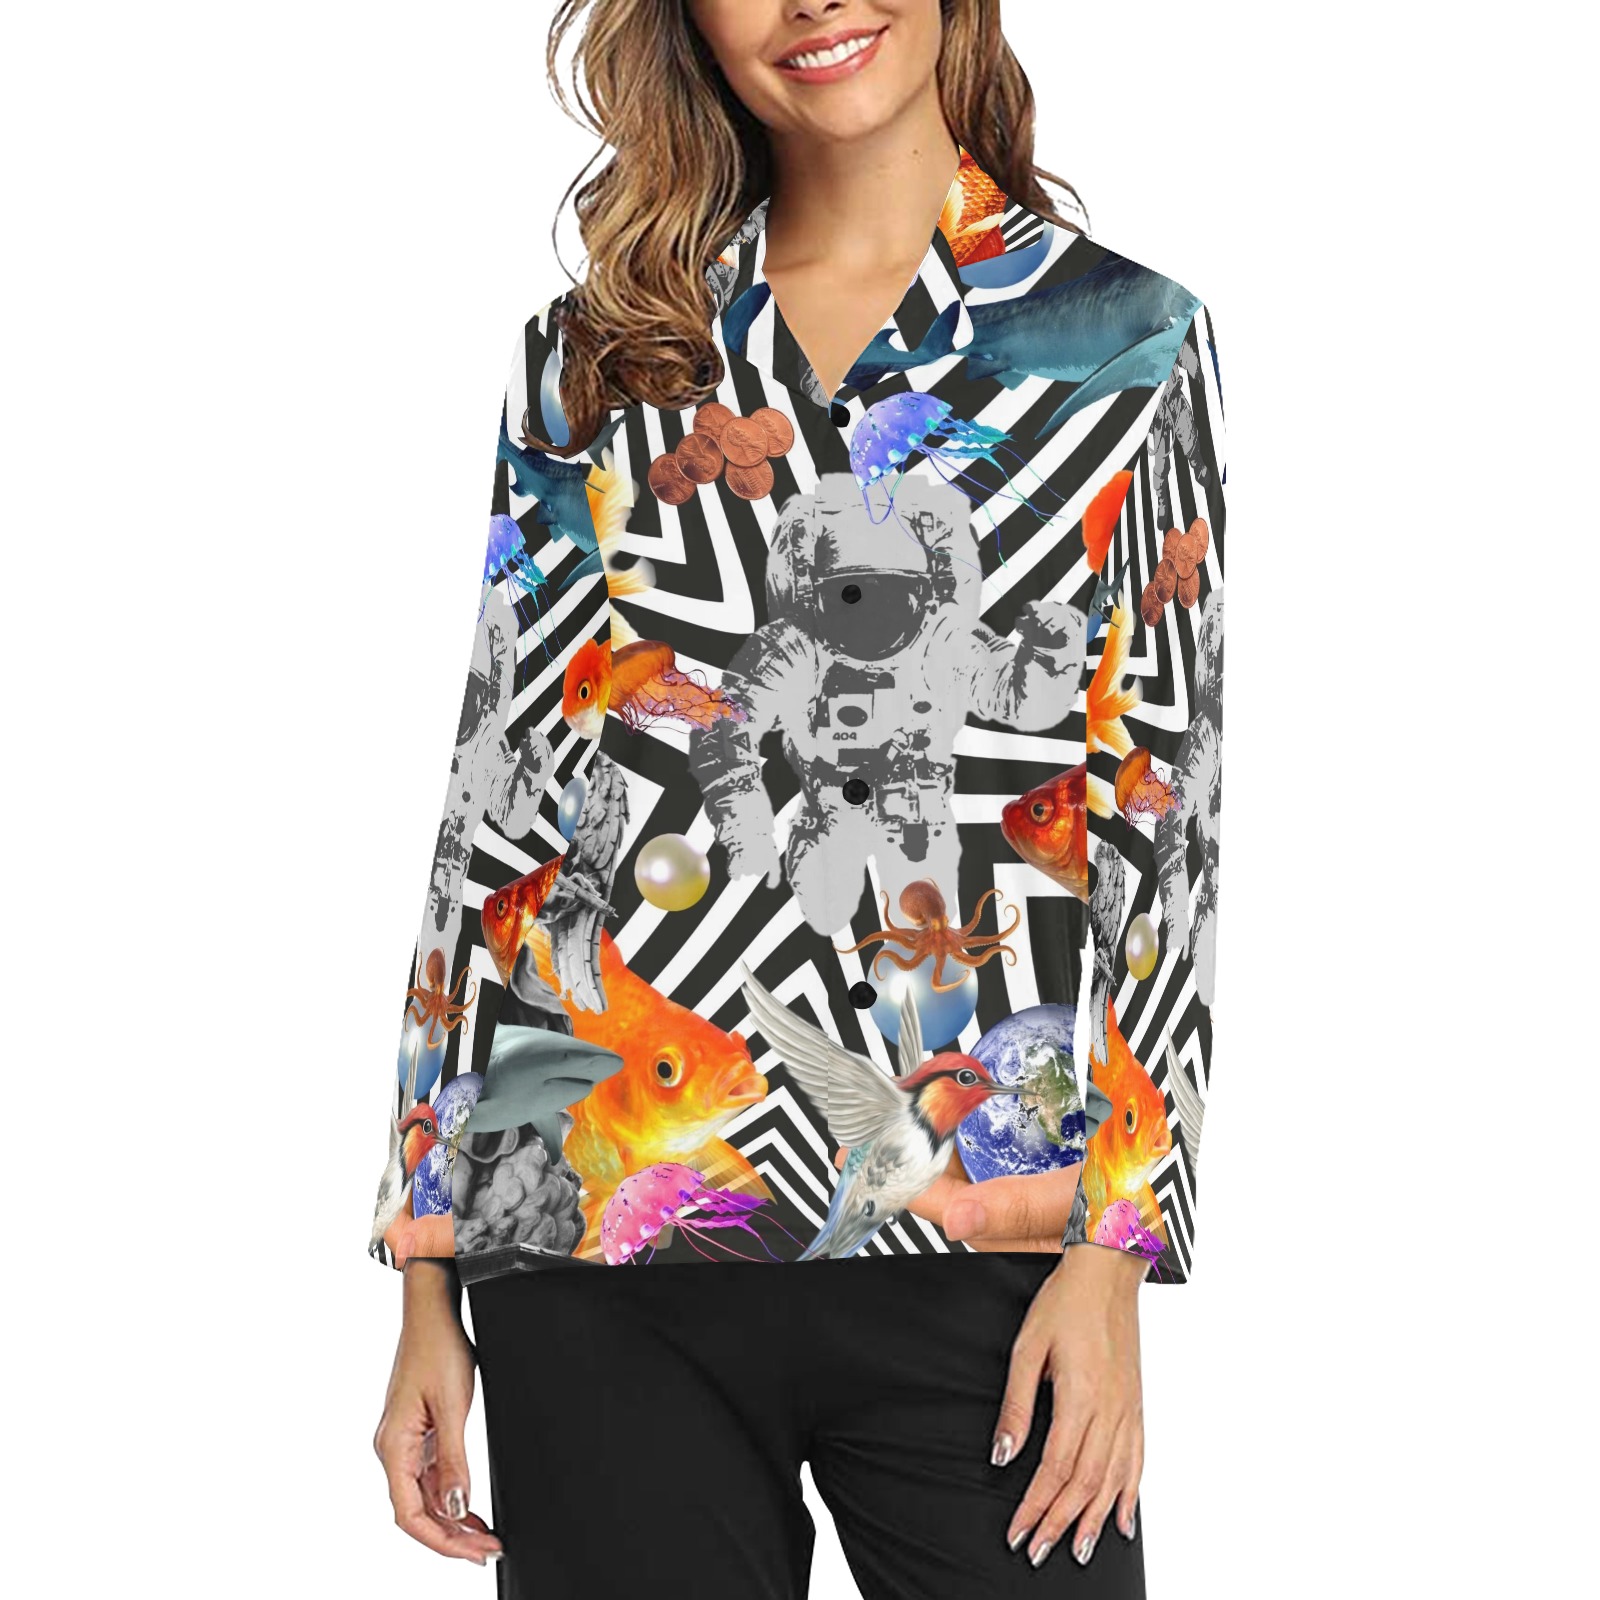 POINT OF ENTRY 2 Women's Long Sleeve Pajama Shirt